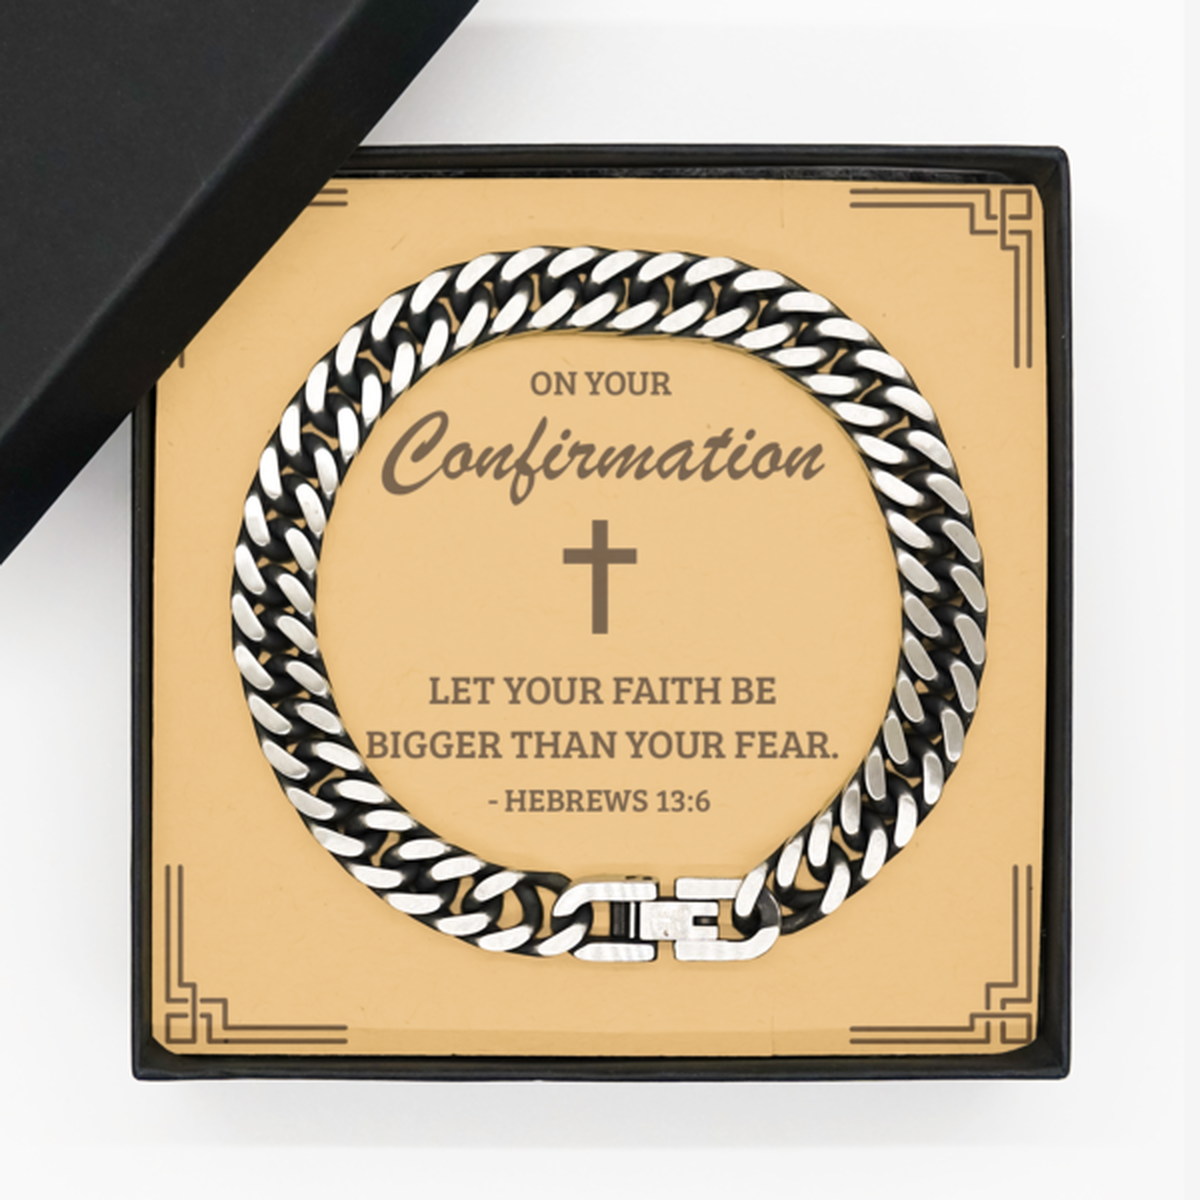 Confirmation Gifts for Teenage Boys, Let your faith be bigger than your fear, Cuban Link Chain Bracelet with Bible Verse Message Card, Religious Catholic Bracelet for Son, Grandson, Dad, Godfather